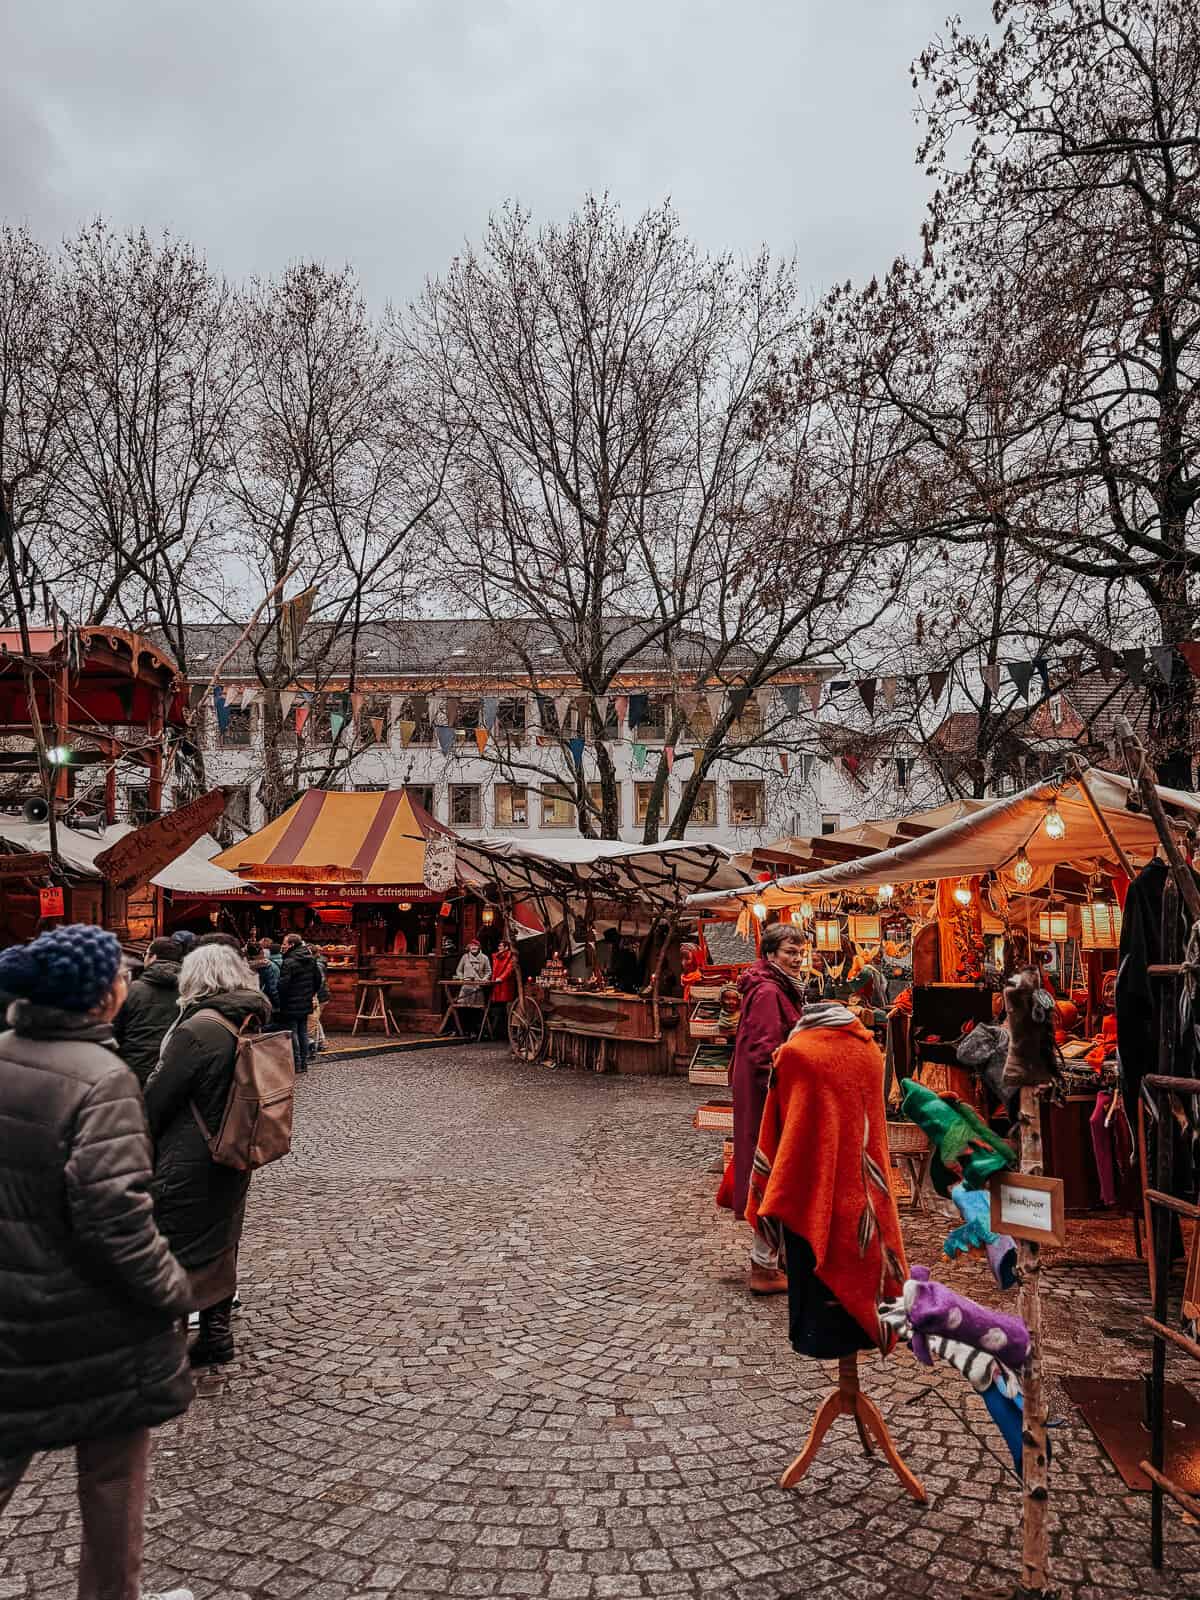 a busy market scene with various stalls, medieval banners, and a crowd of visitors enjoying the atmosphere.